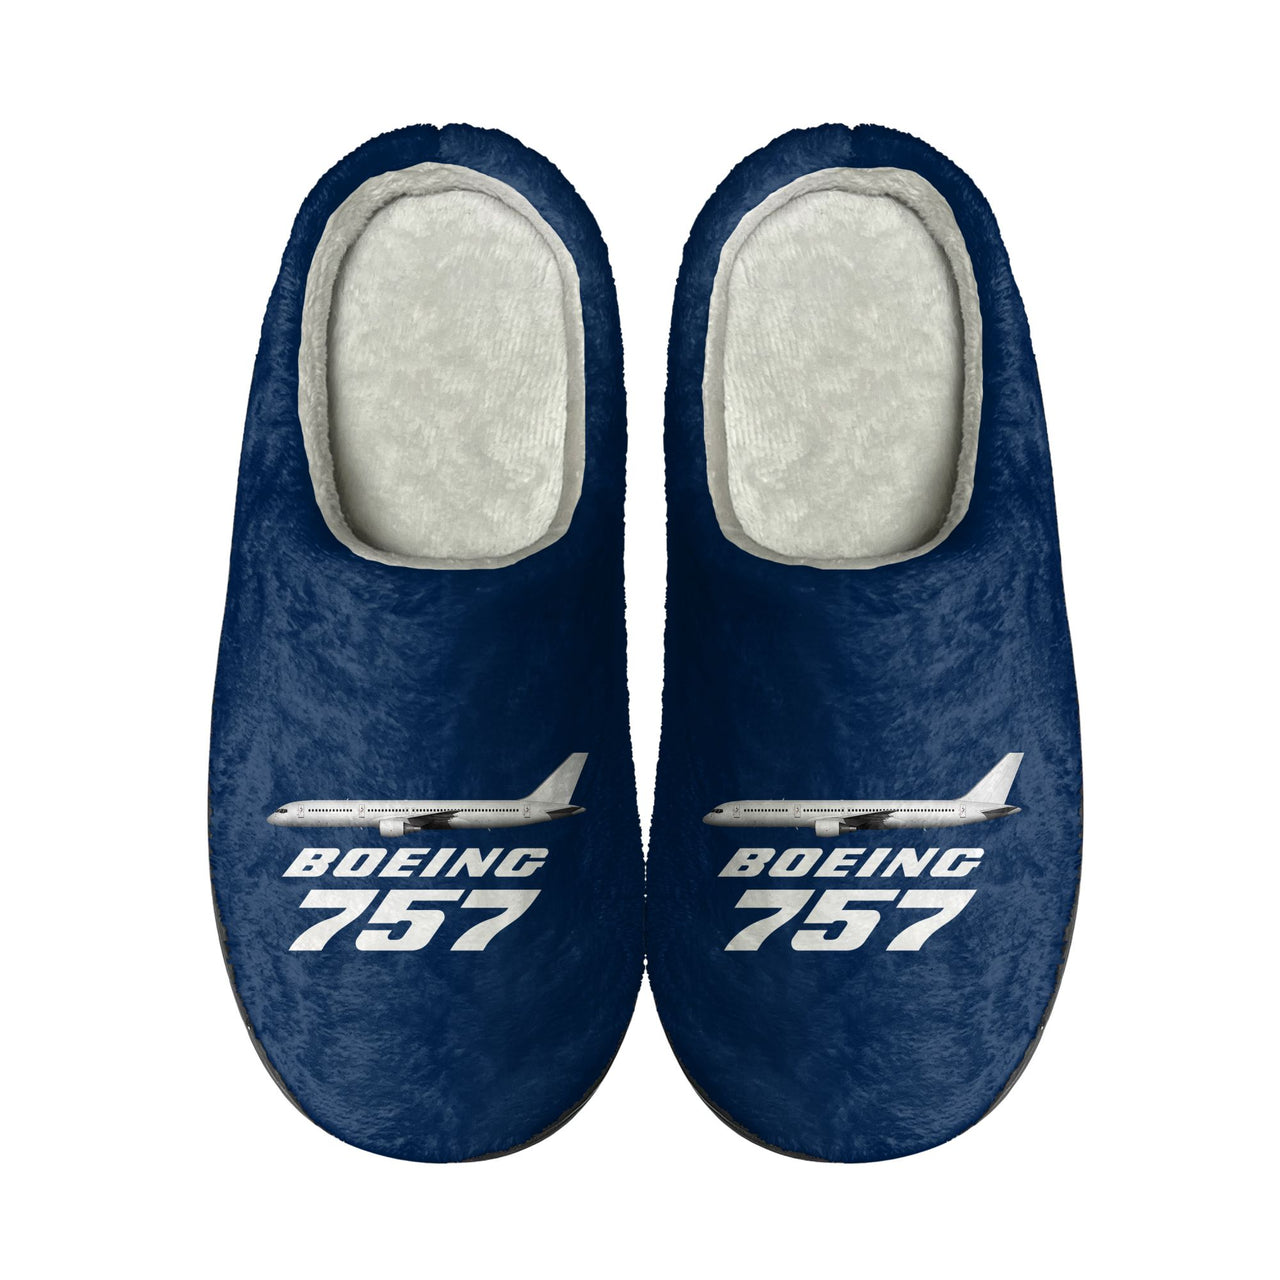 The Boeing 757 Designed Cotton Slippers